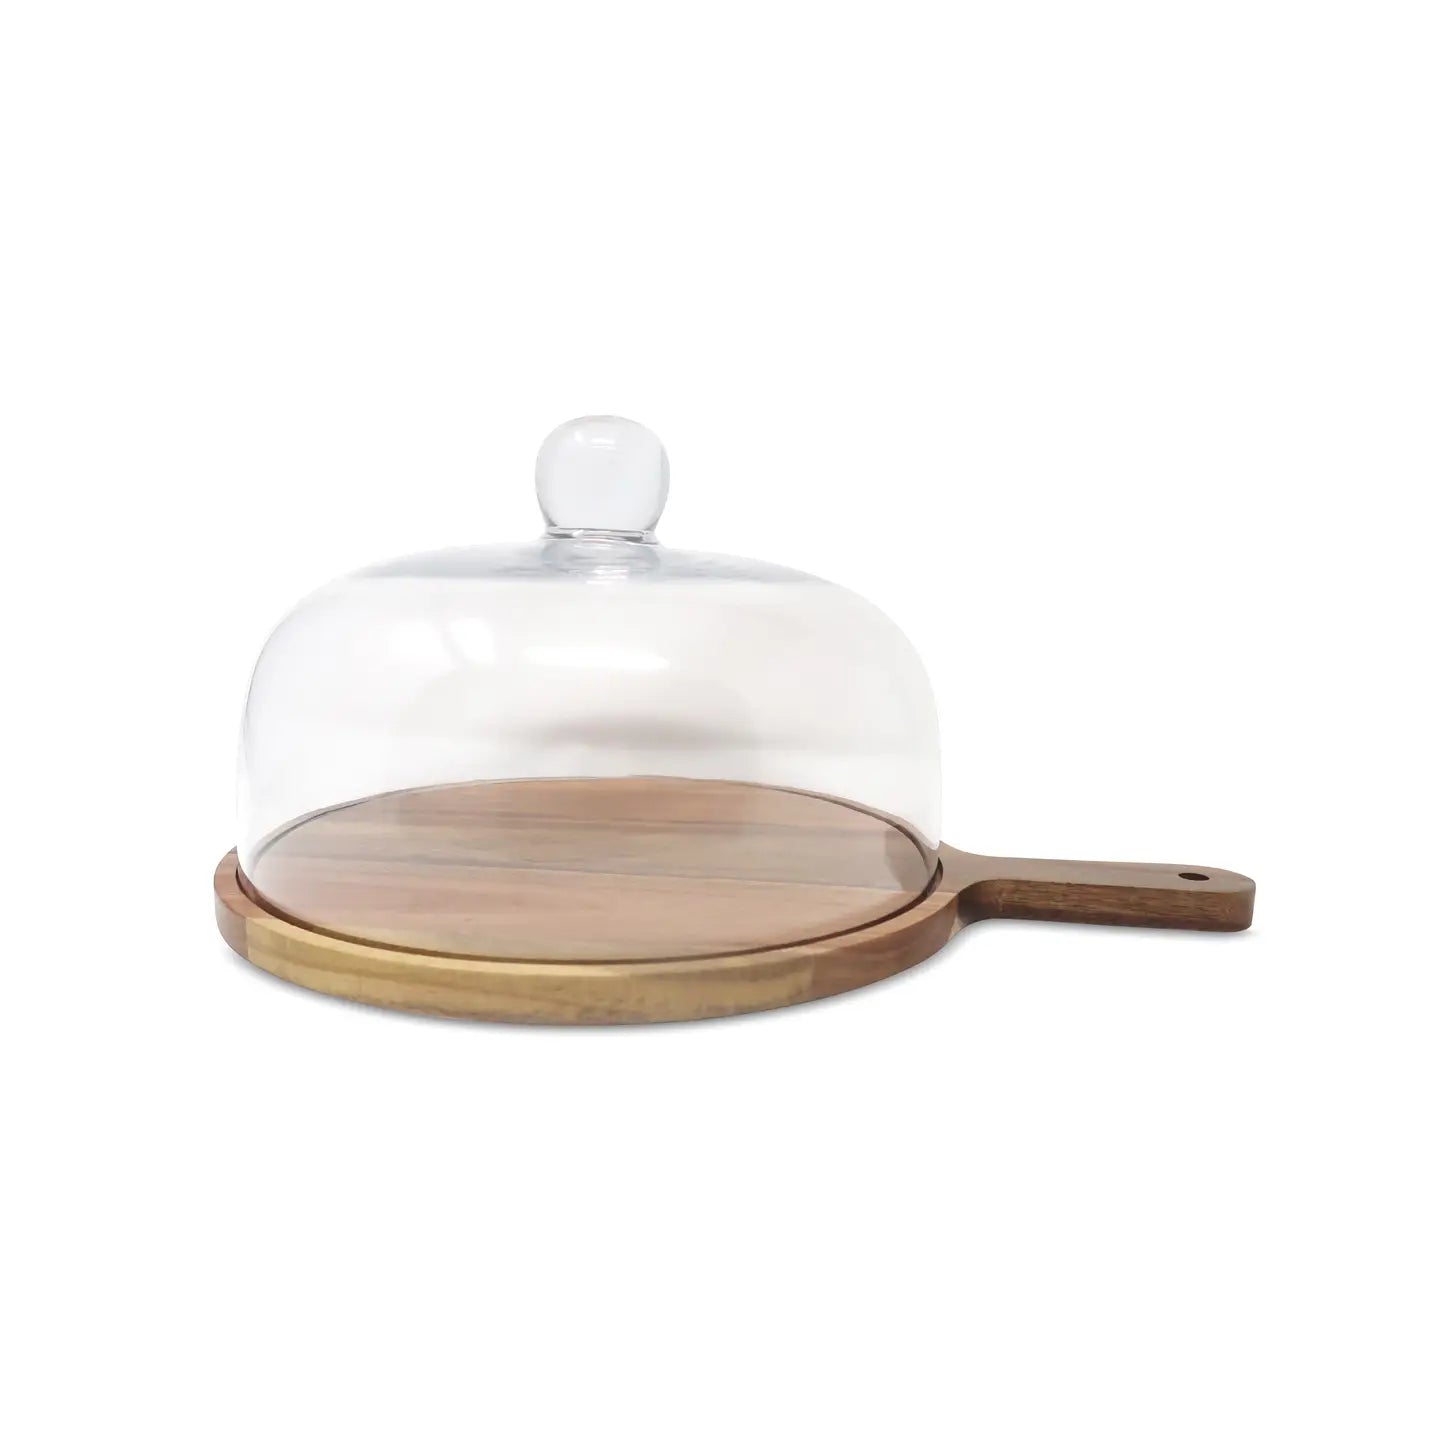 Round Glass Cake Dome On Wooden Board Base with Handle Cake Stands High Class Touch - Home Decor 